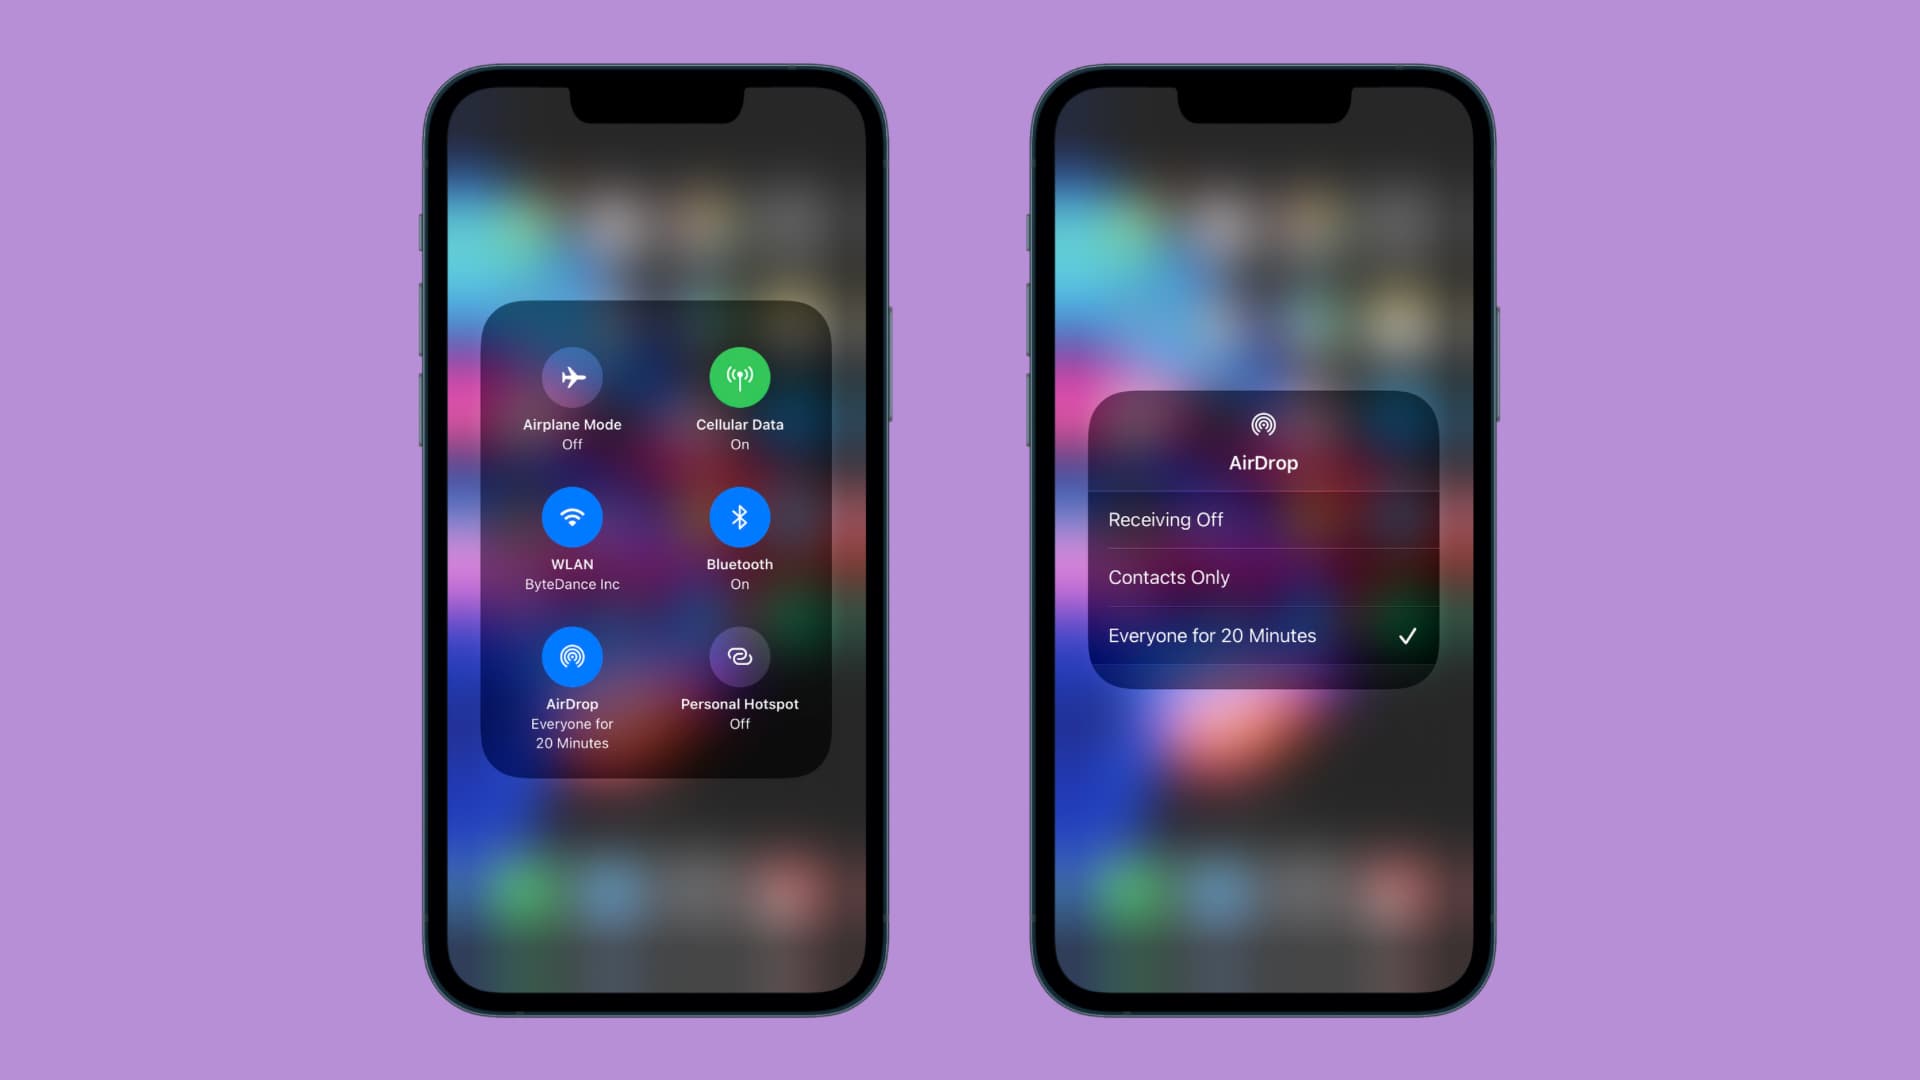 AirDrop16 brings flexible AirDrop functionality for the ‘Everyone’ setting on jailbroken devices